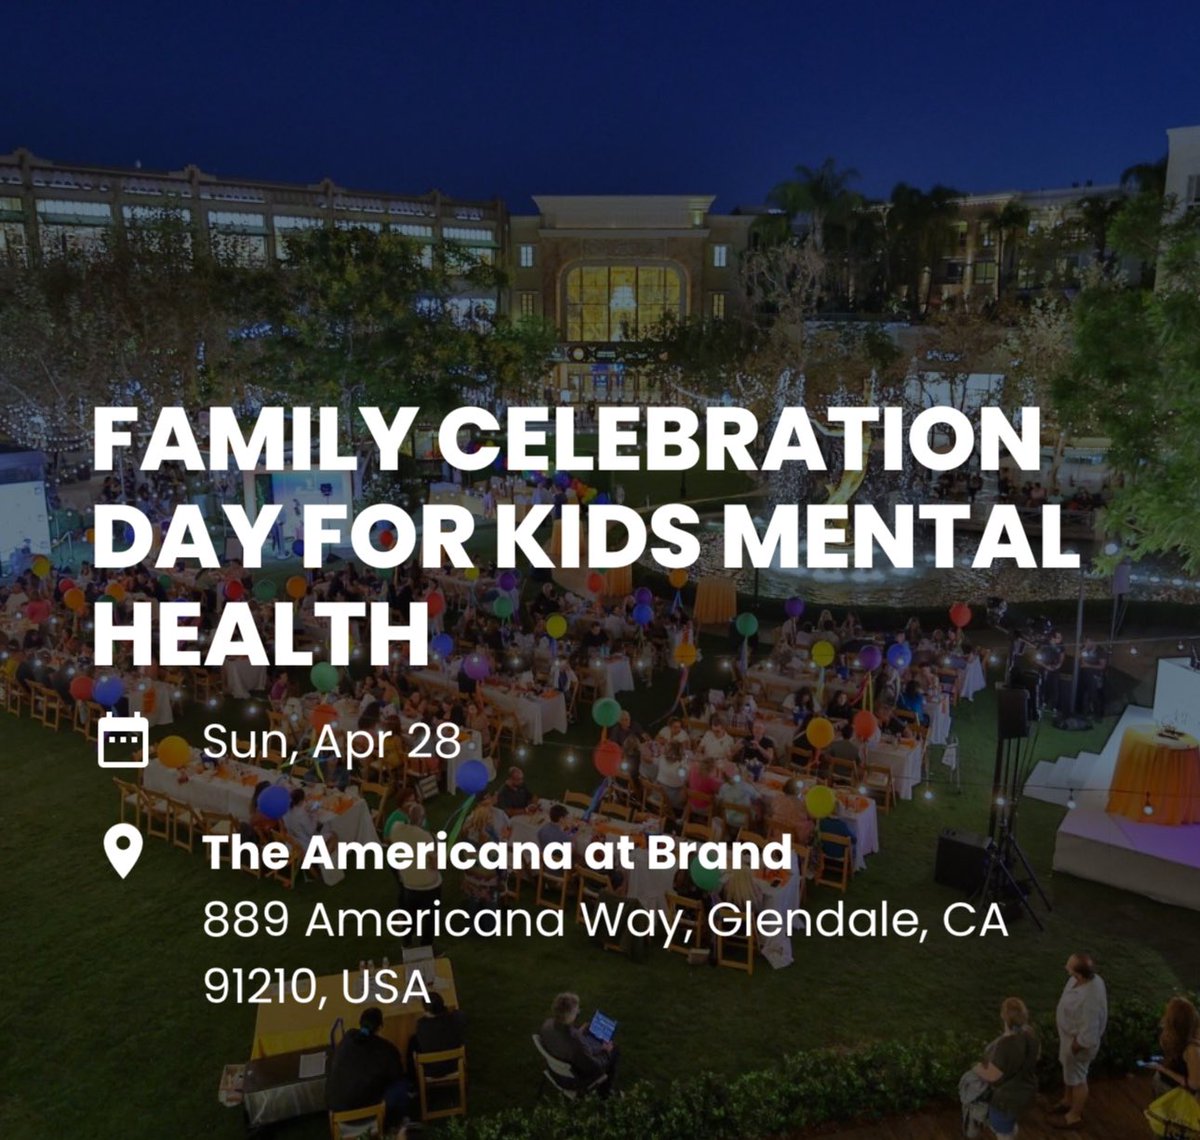 L.A. friends! Kick off Mental Health Awareness Month with a fun-filled day for the whole family! The Family Celebration Day for Kids Mental Health will be held on Sunday, April 28, from noon to 4:00 P.M. at @AmericanaBrand in Glendale. Enjoy an outdoor family fun festival for…